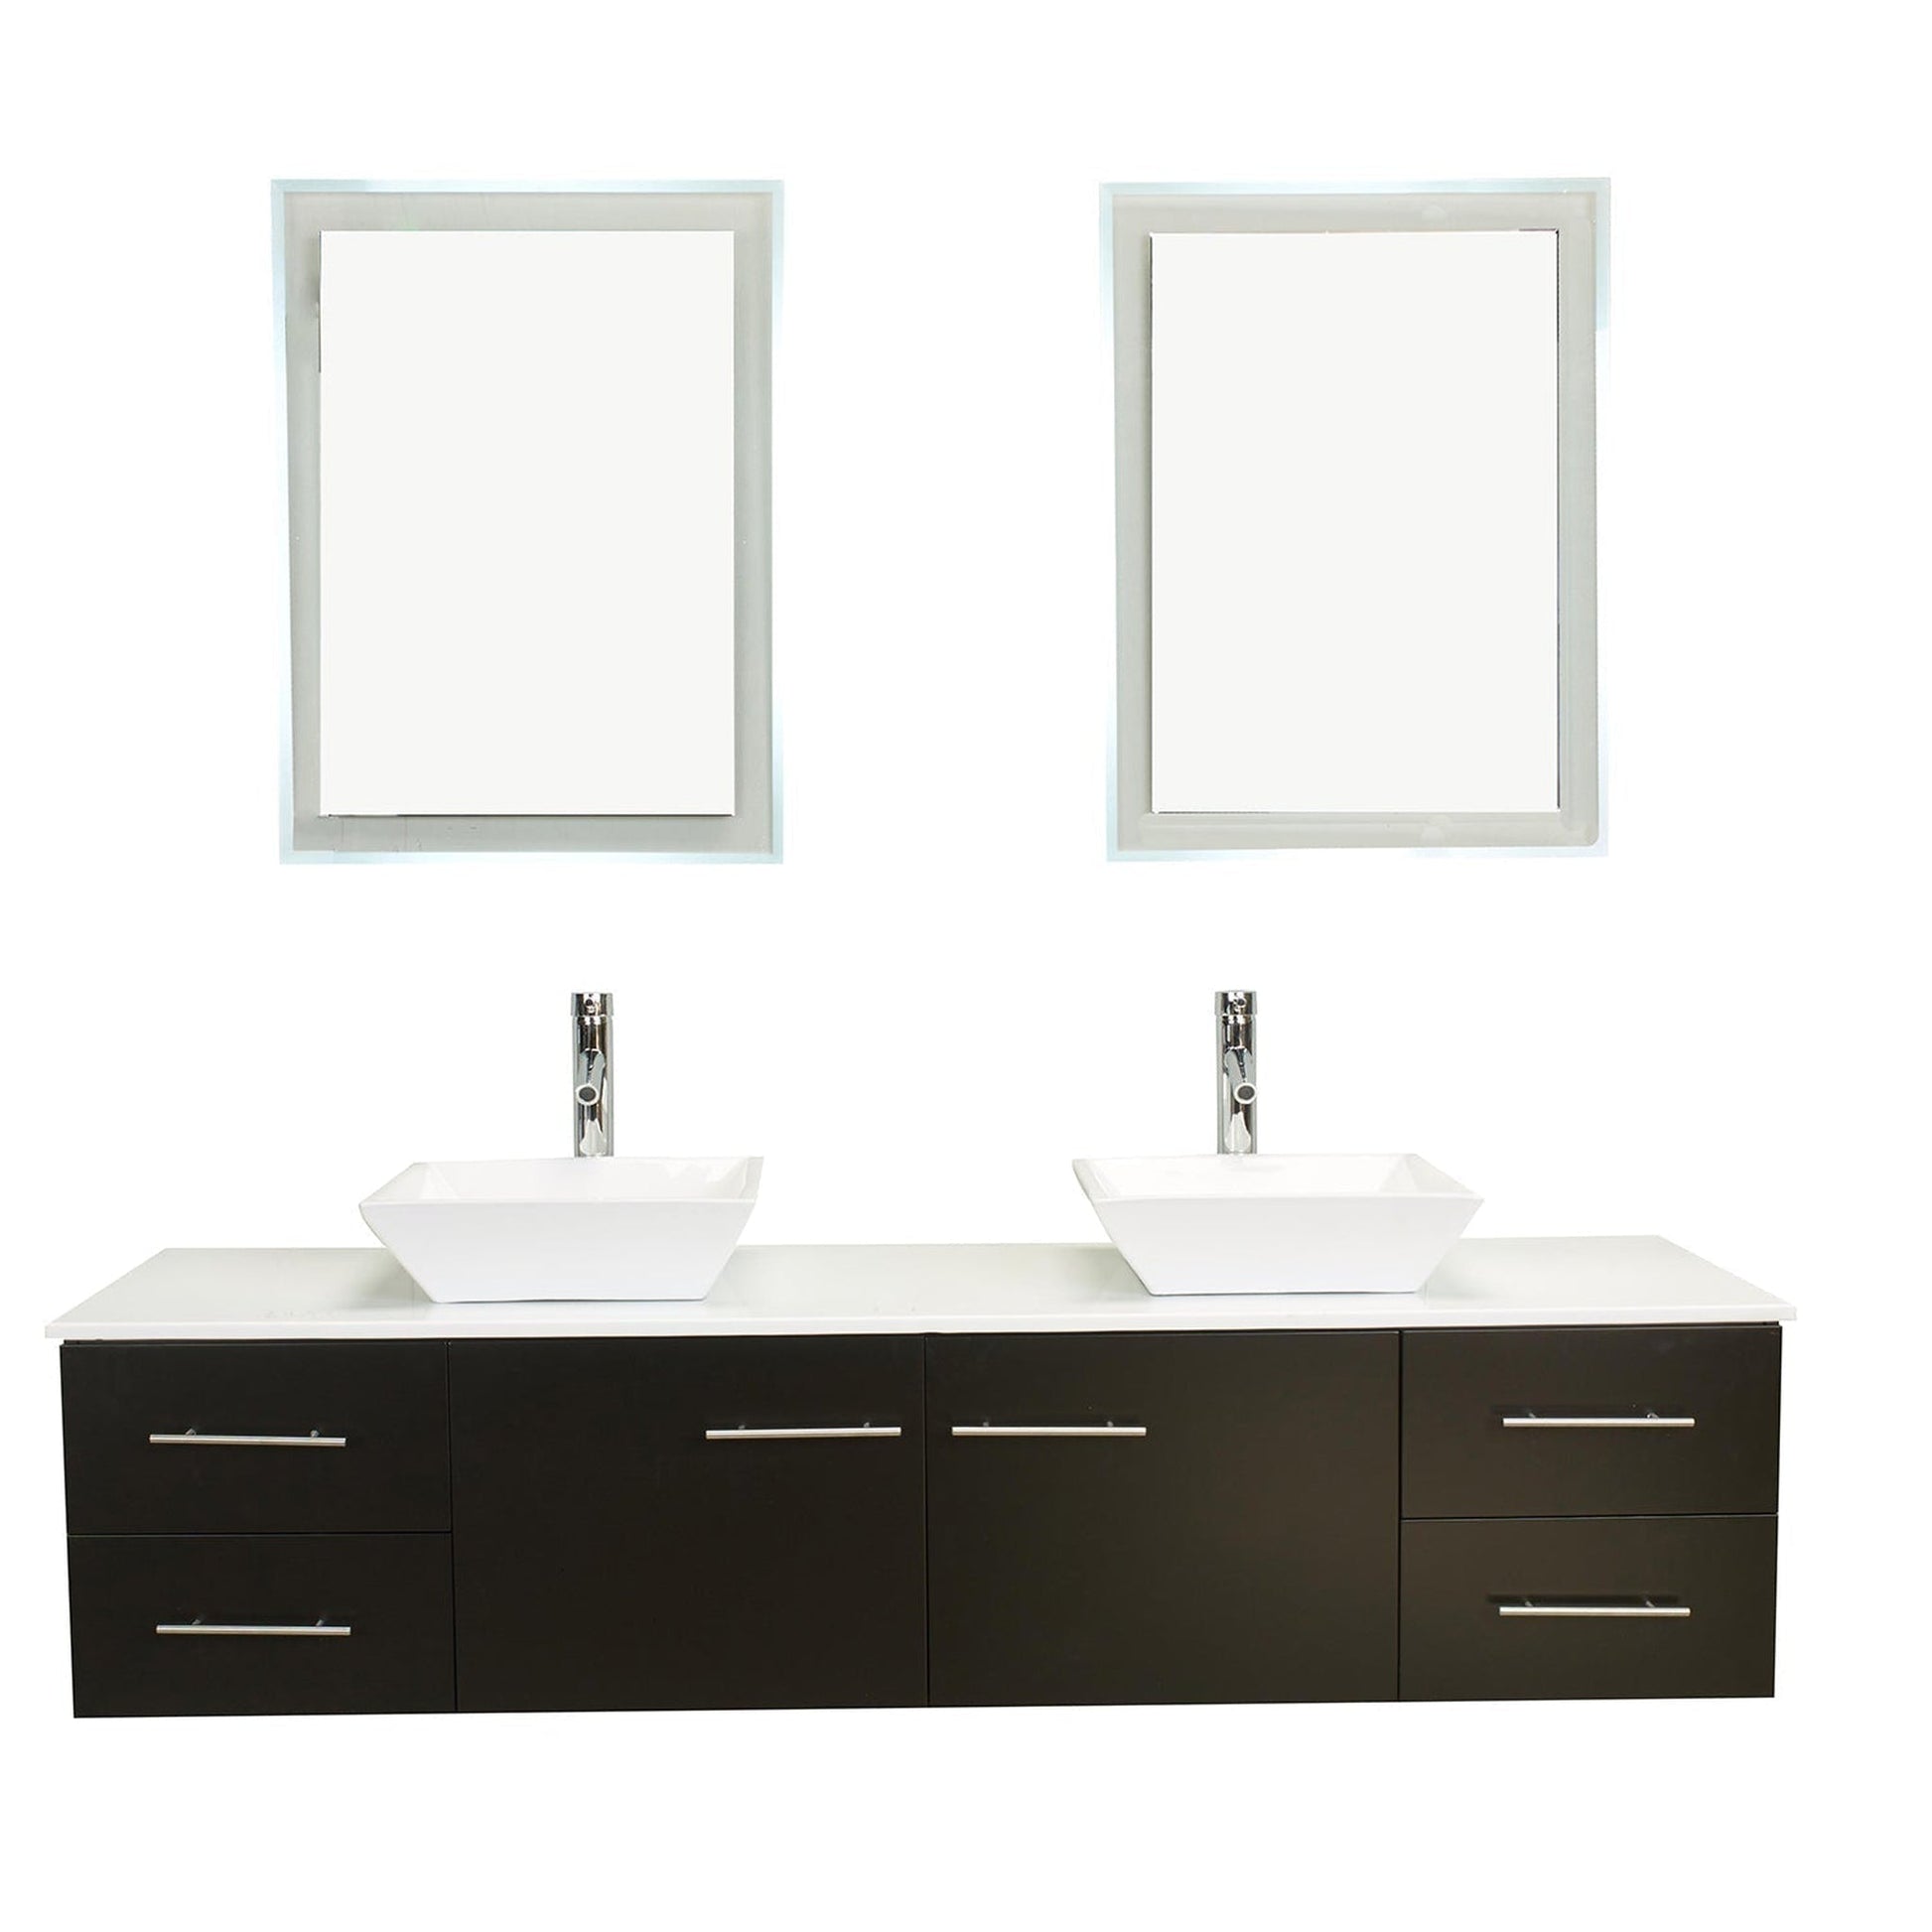 Eviva Totti Wave 72" x 16" Espresso Wall-Mounted Bathroom Vanity With White Man-Made Stone Countertop and Double Porcelain Sink